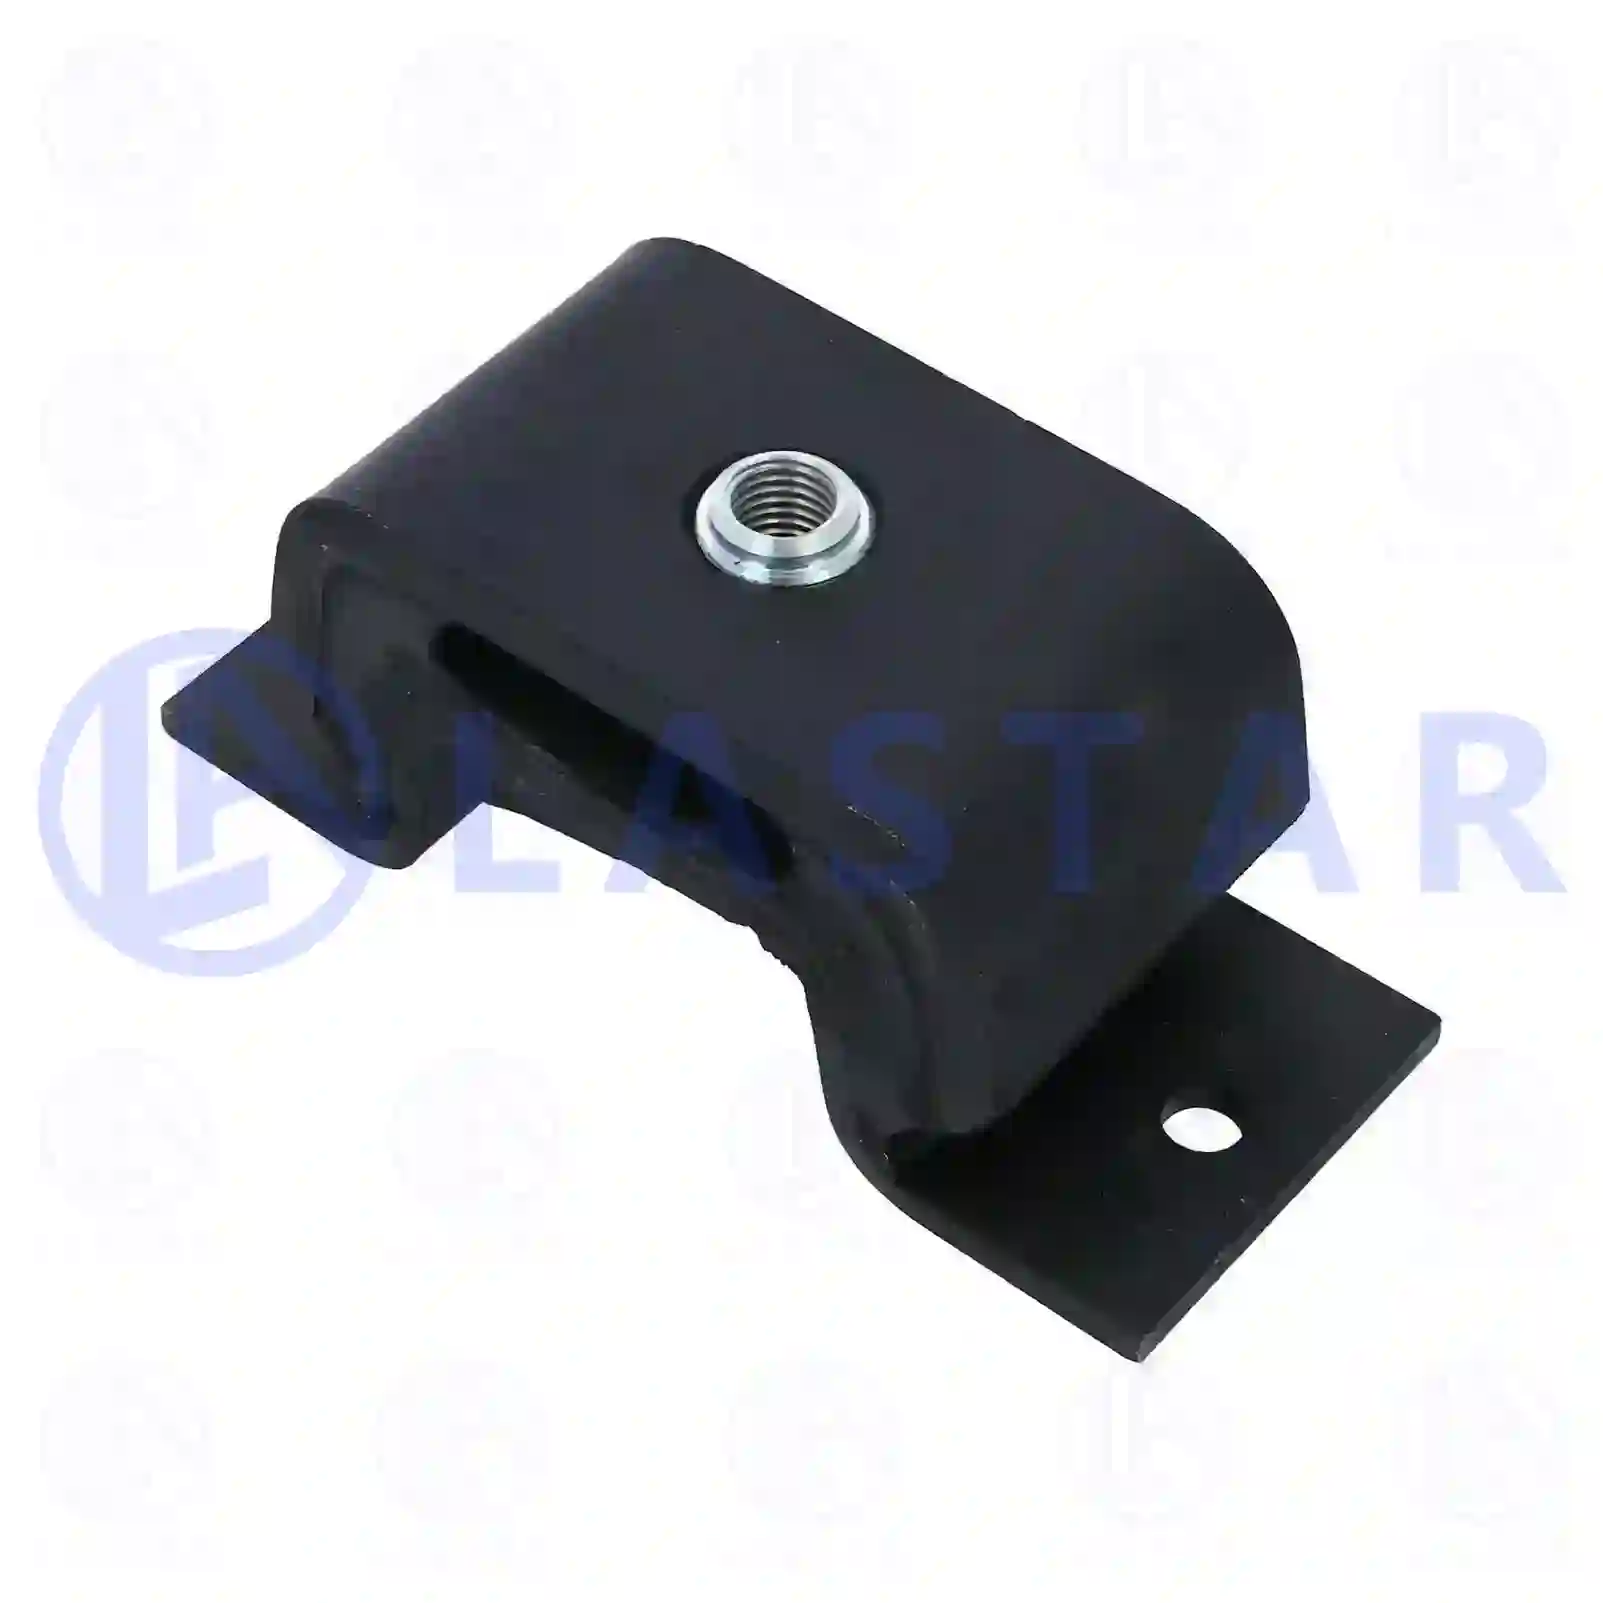 Engine mounting, rear, 77703431, 5010130602, , , , , ||  77703431 Lastar Spare Part | Truck Spare Parts, Auotomotive Spare Parts Engine mounting, rear, 77703431, 5010130602, , , , , ||  77703431 Lastar Spare Part | Truck Spare Parts, Auotomotive Spare Parts